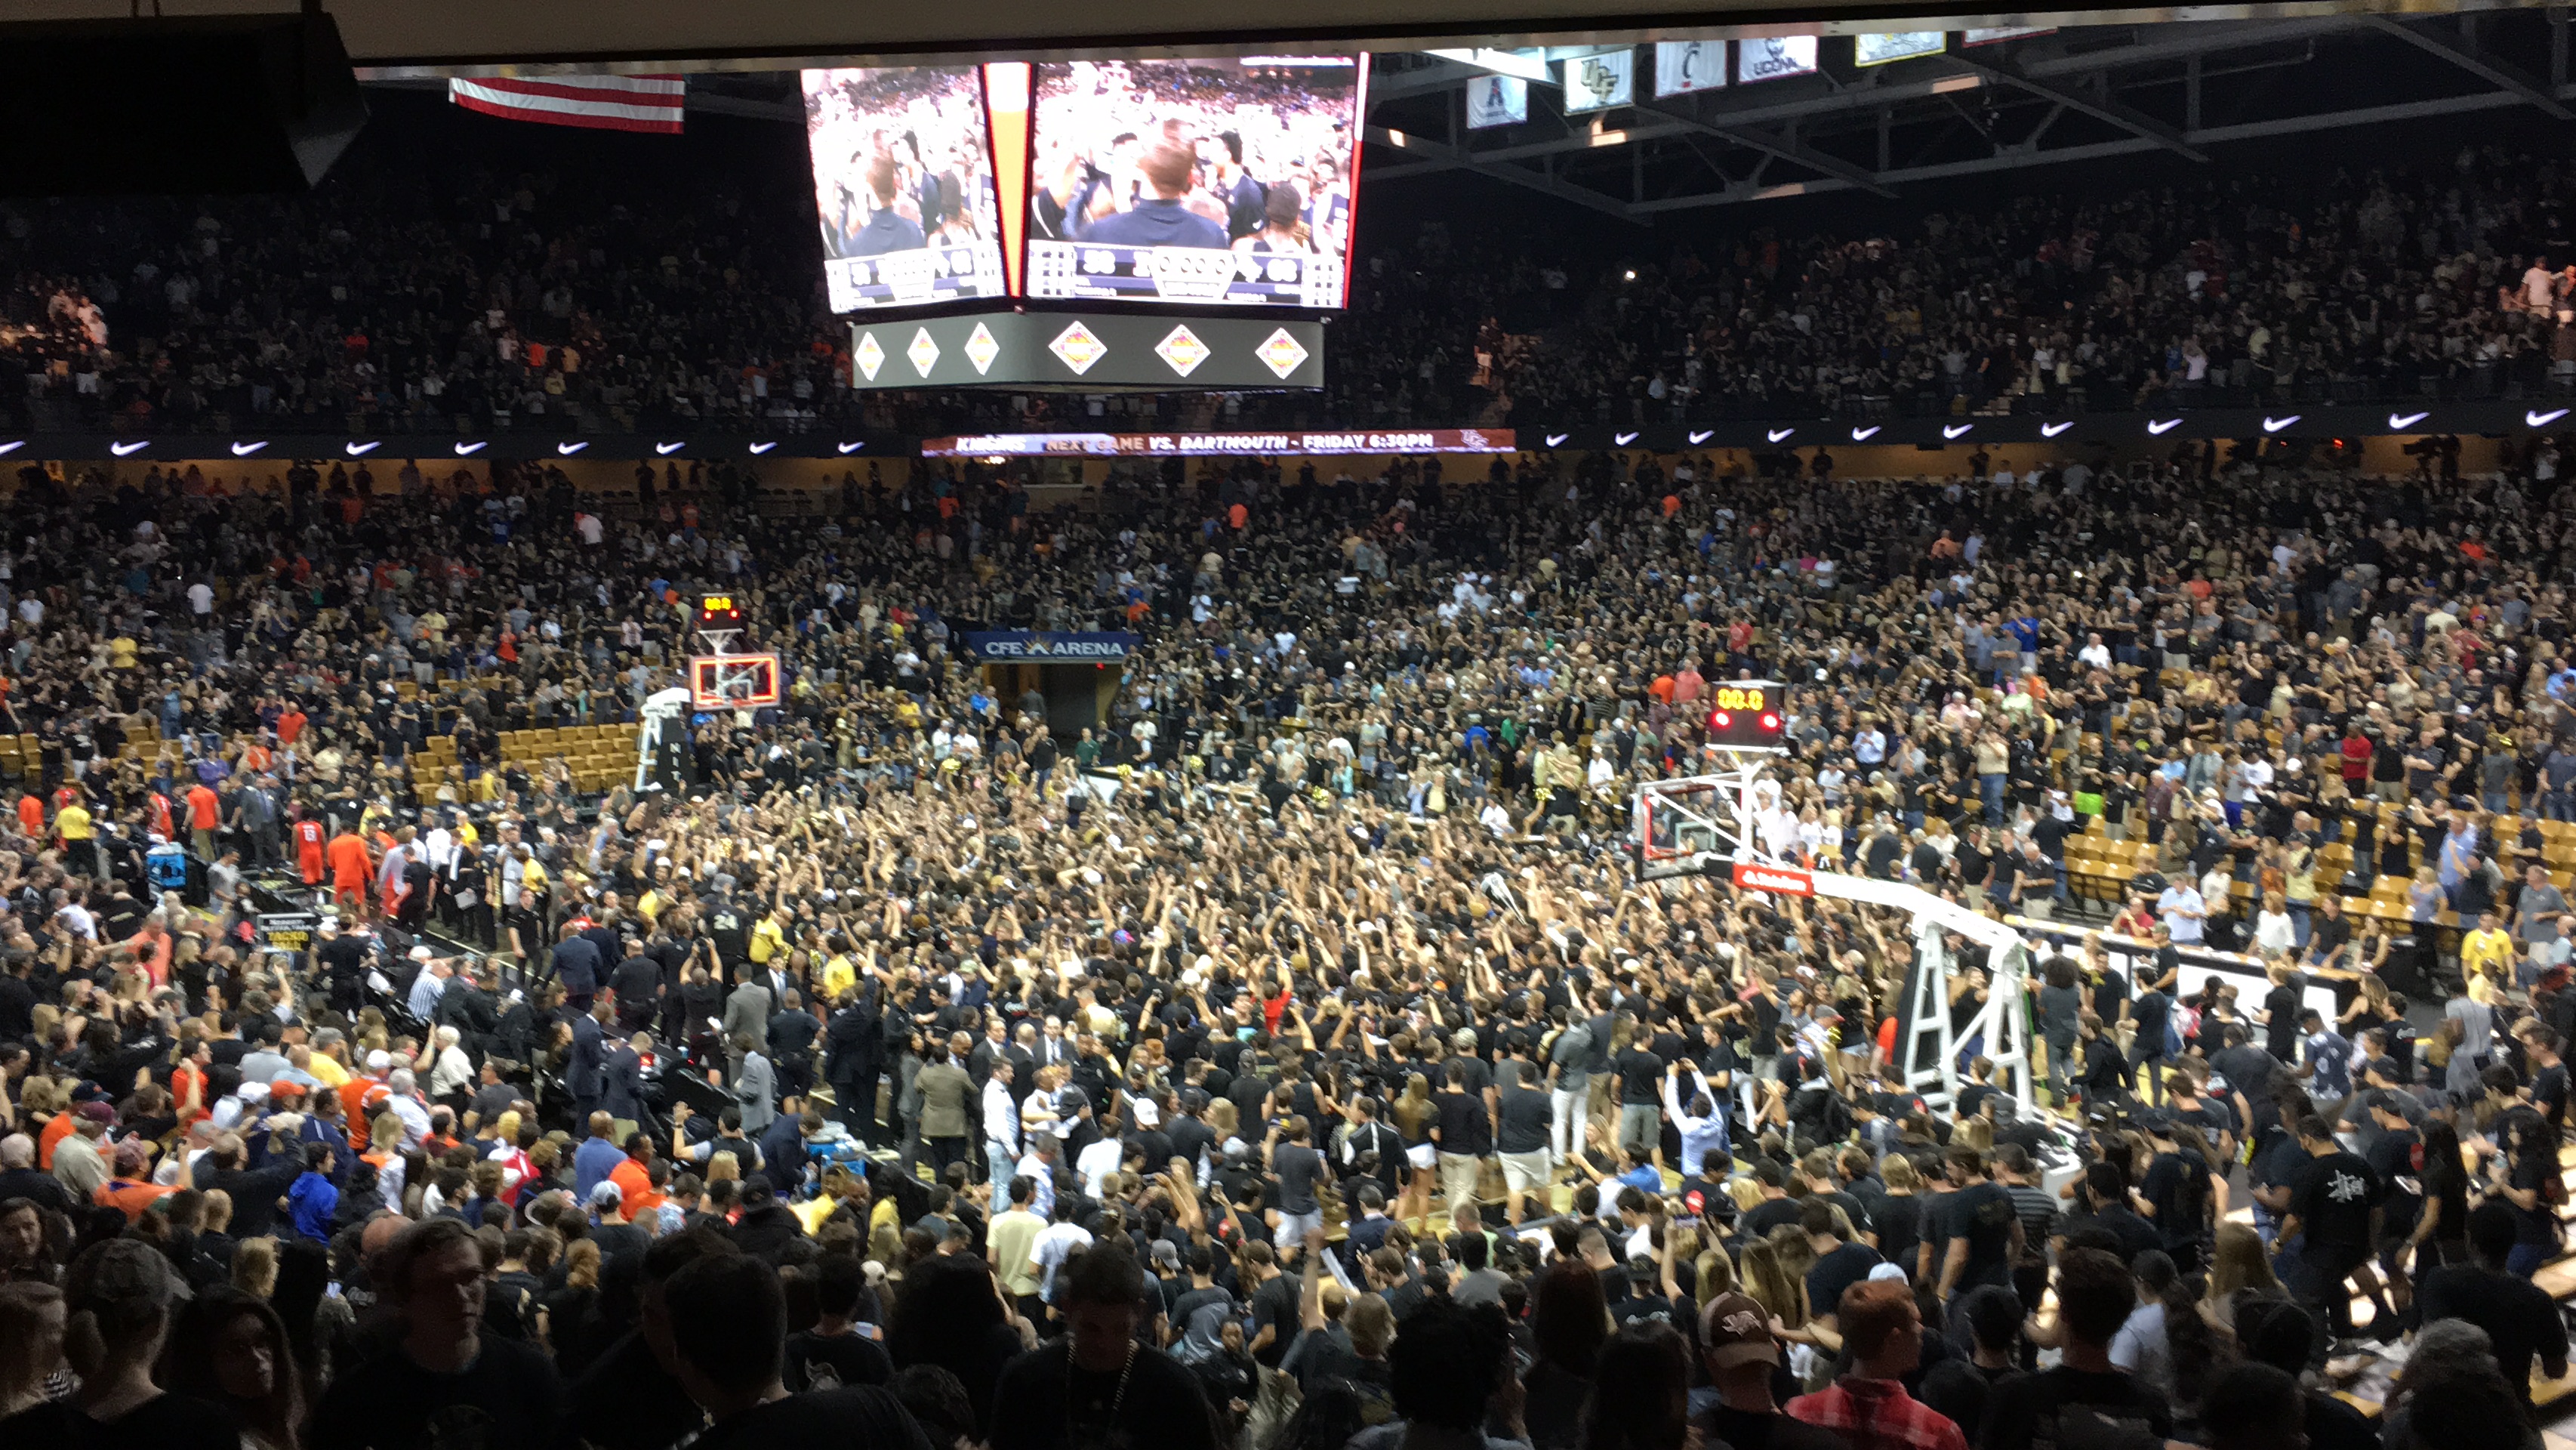 The post-game scene at CFE Arena following UCF's NIT Quarterfinal win over Illinois (Photo: Jeff Sharon)